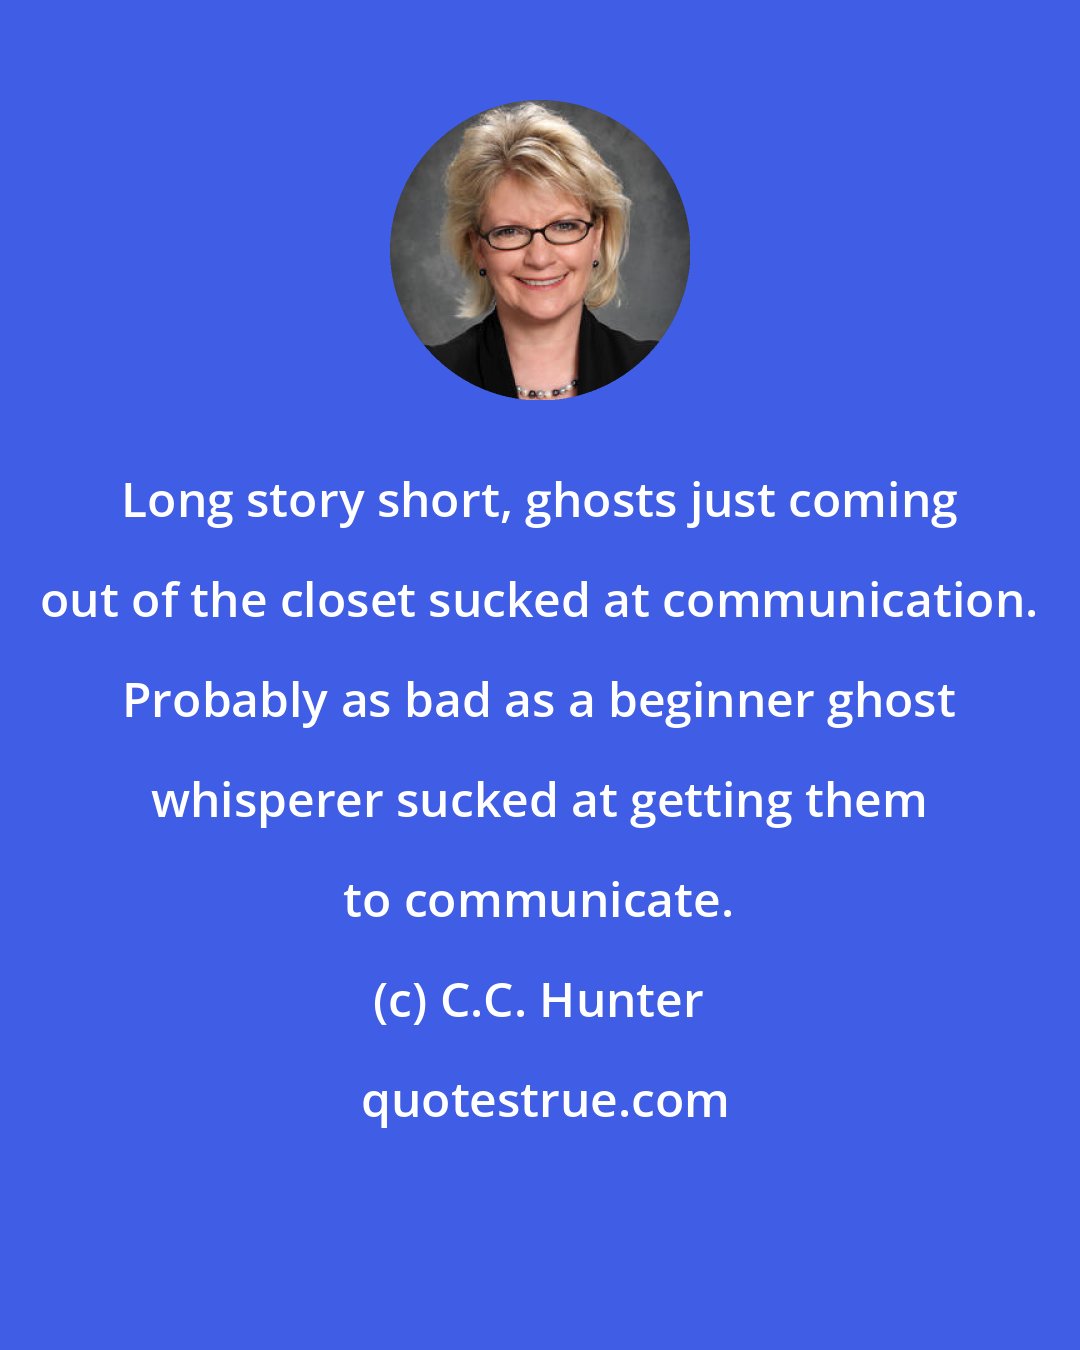 C.C. Hunter: Long story short, ghosts just coming out of the closet sucked at communication. Probably as bad as a beginner ghost whisperer sucked at getting them to communicate.